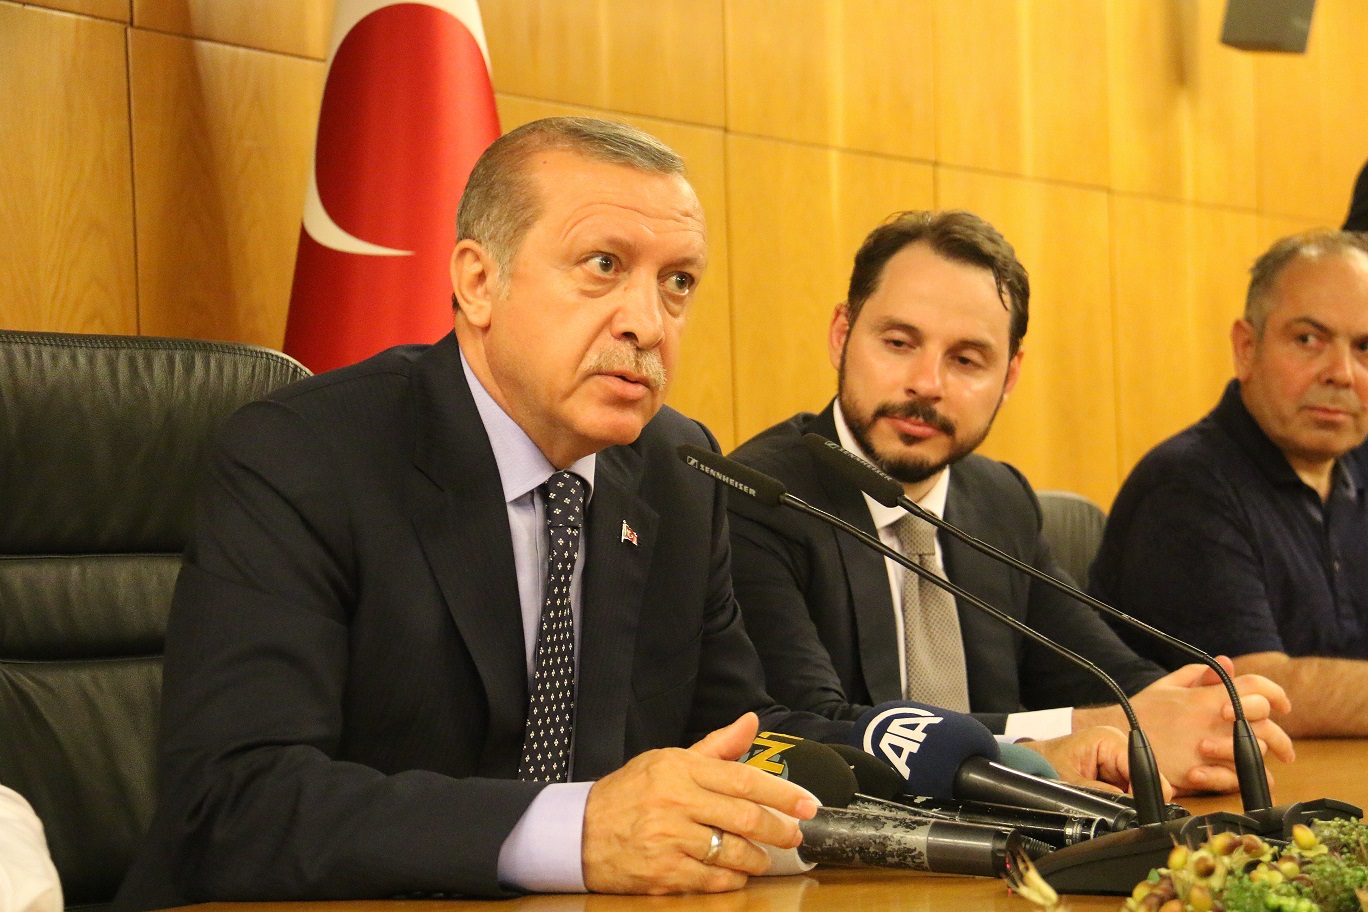 Erdoğan gave a speech at Atatürk Airport noting that F-16s threatened to intercept his private plane, and that the plotters were invaders and that the country would not surrender to them